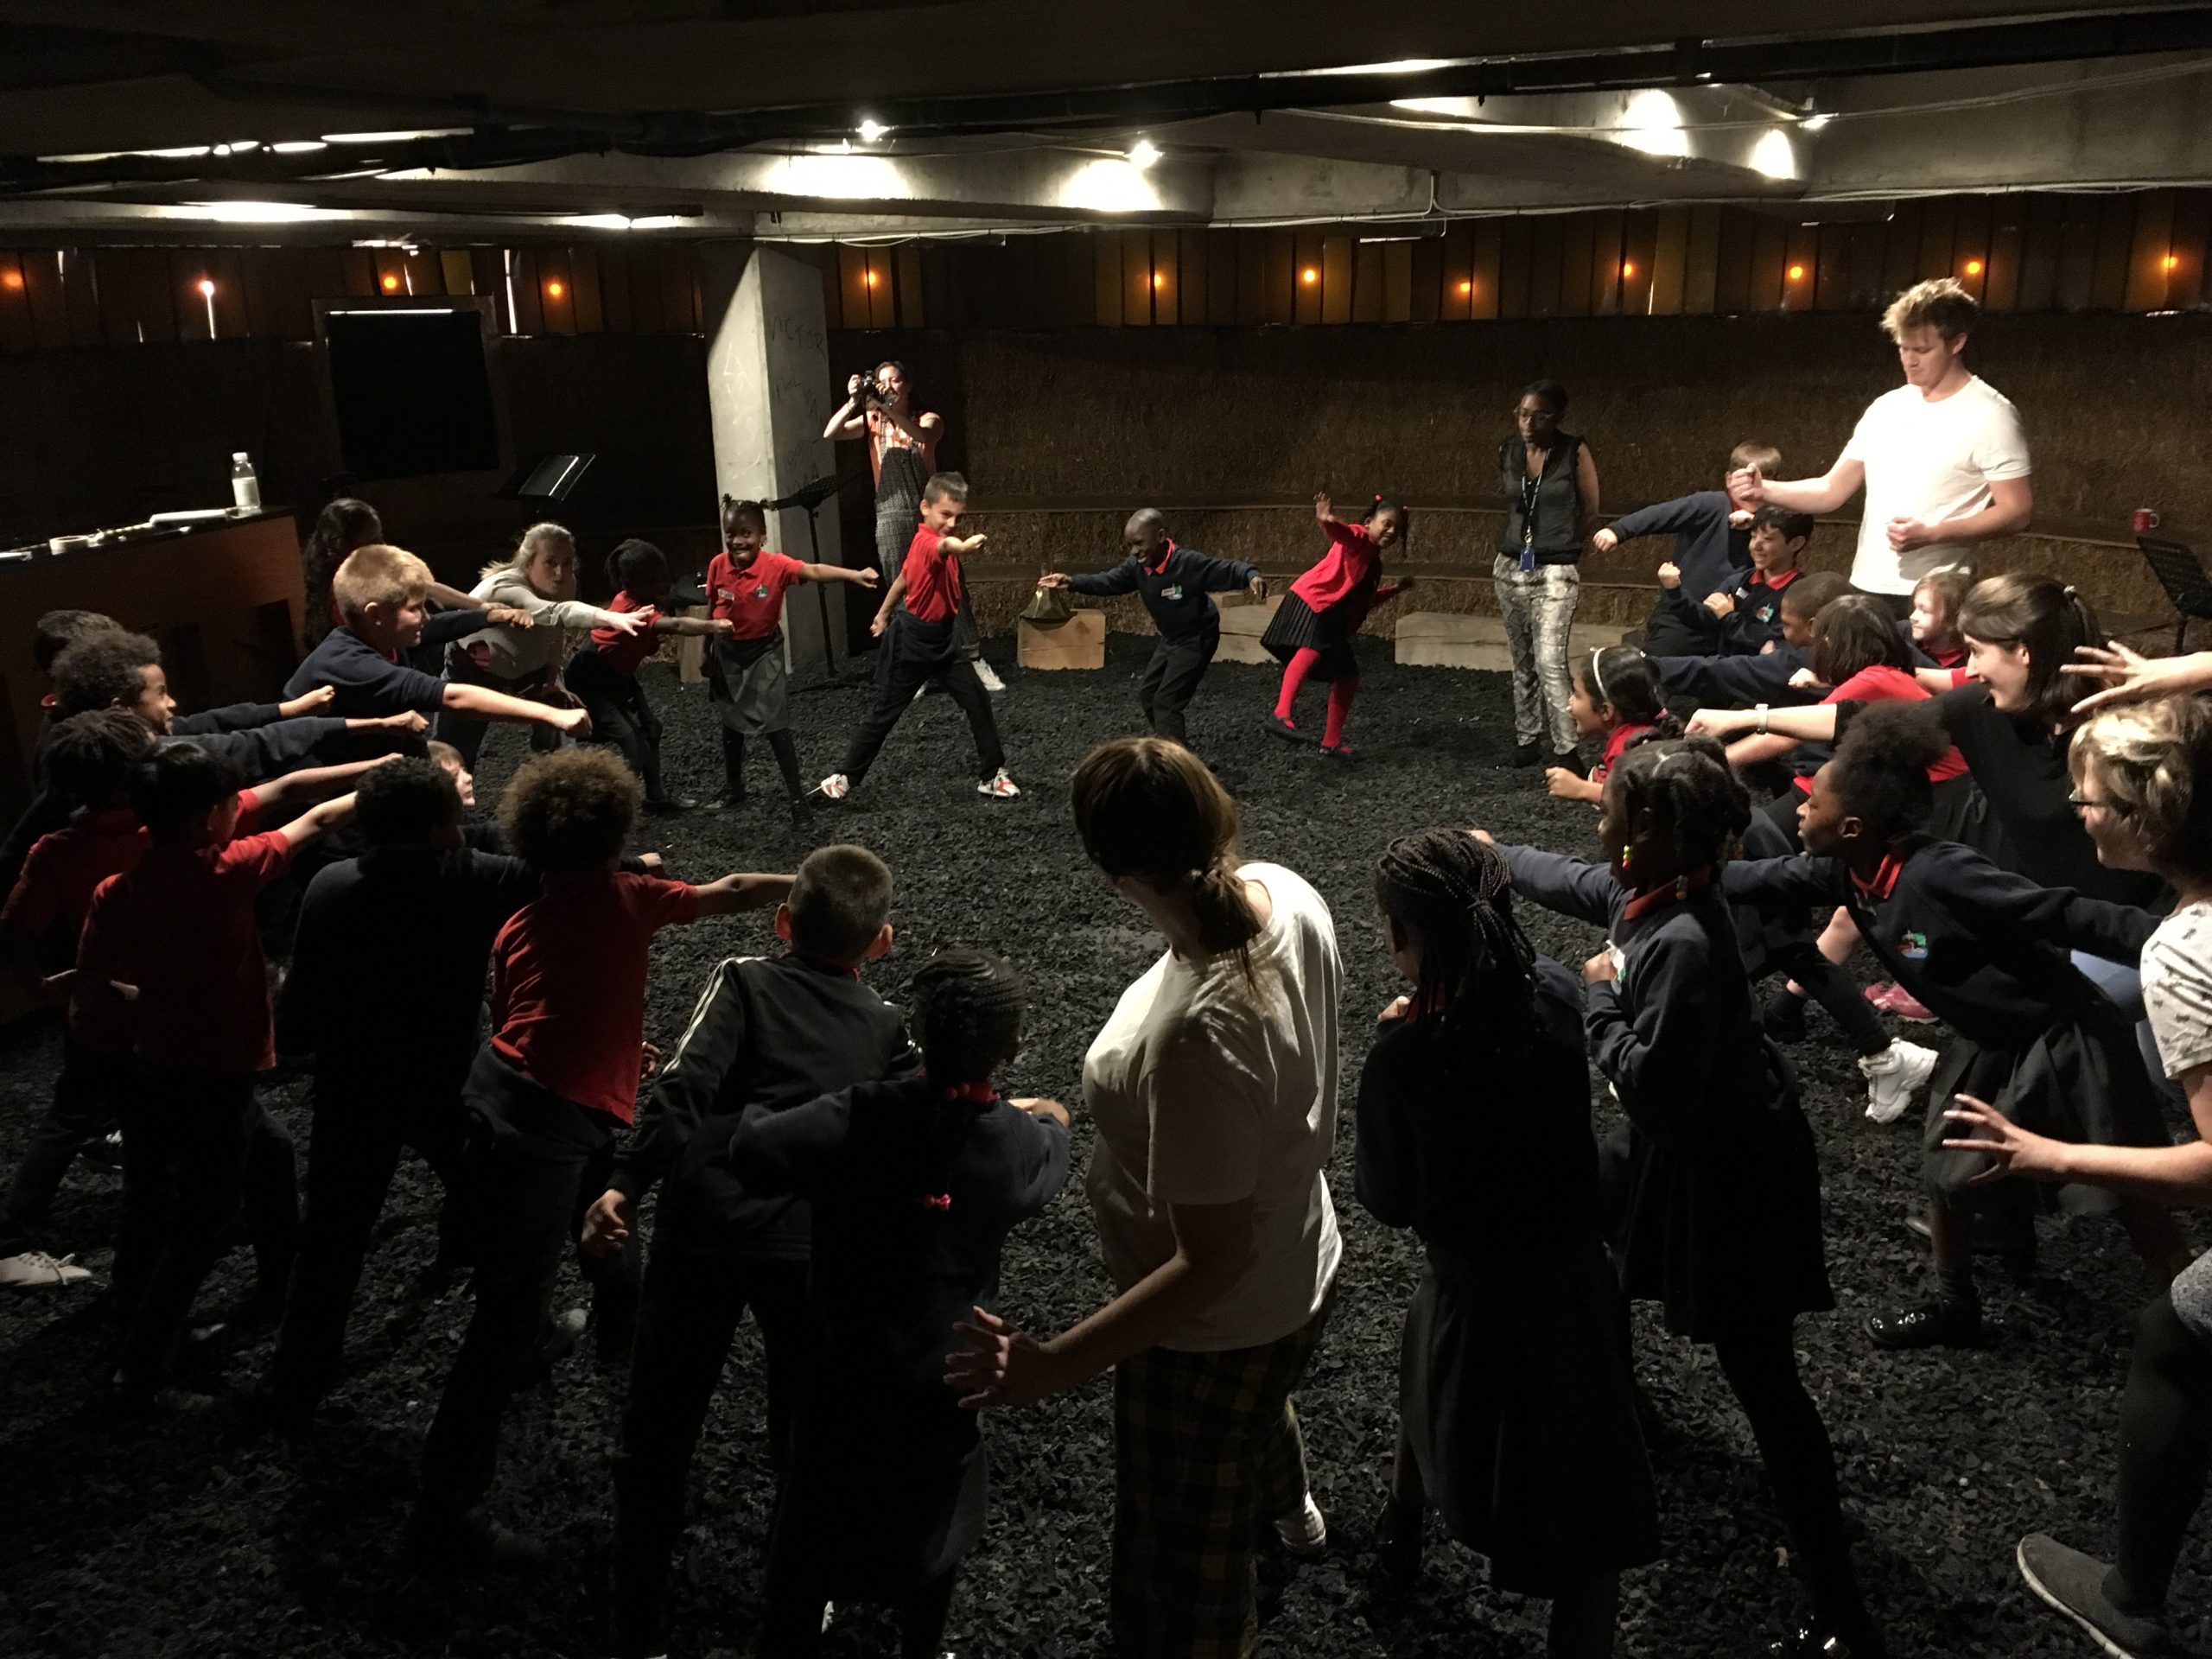 ID: a full classroom of young children are stood in a circle inside a concrete room with rubber flooring, making an active pose. They are led by an adult workshop leader.